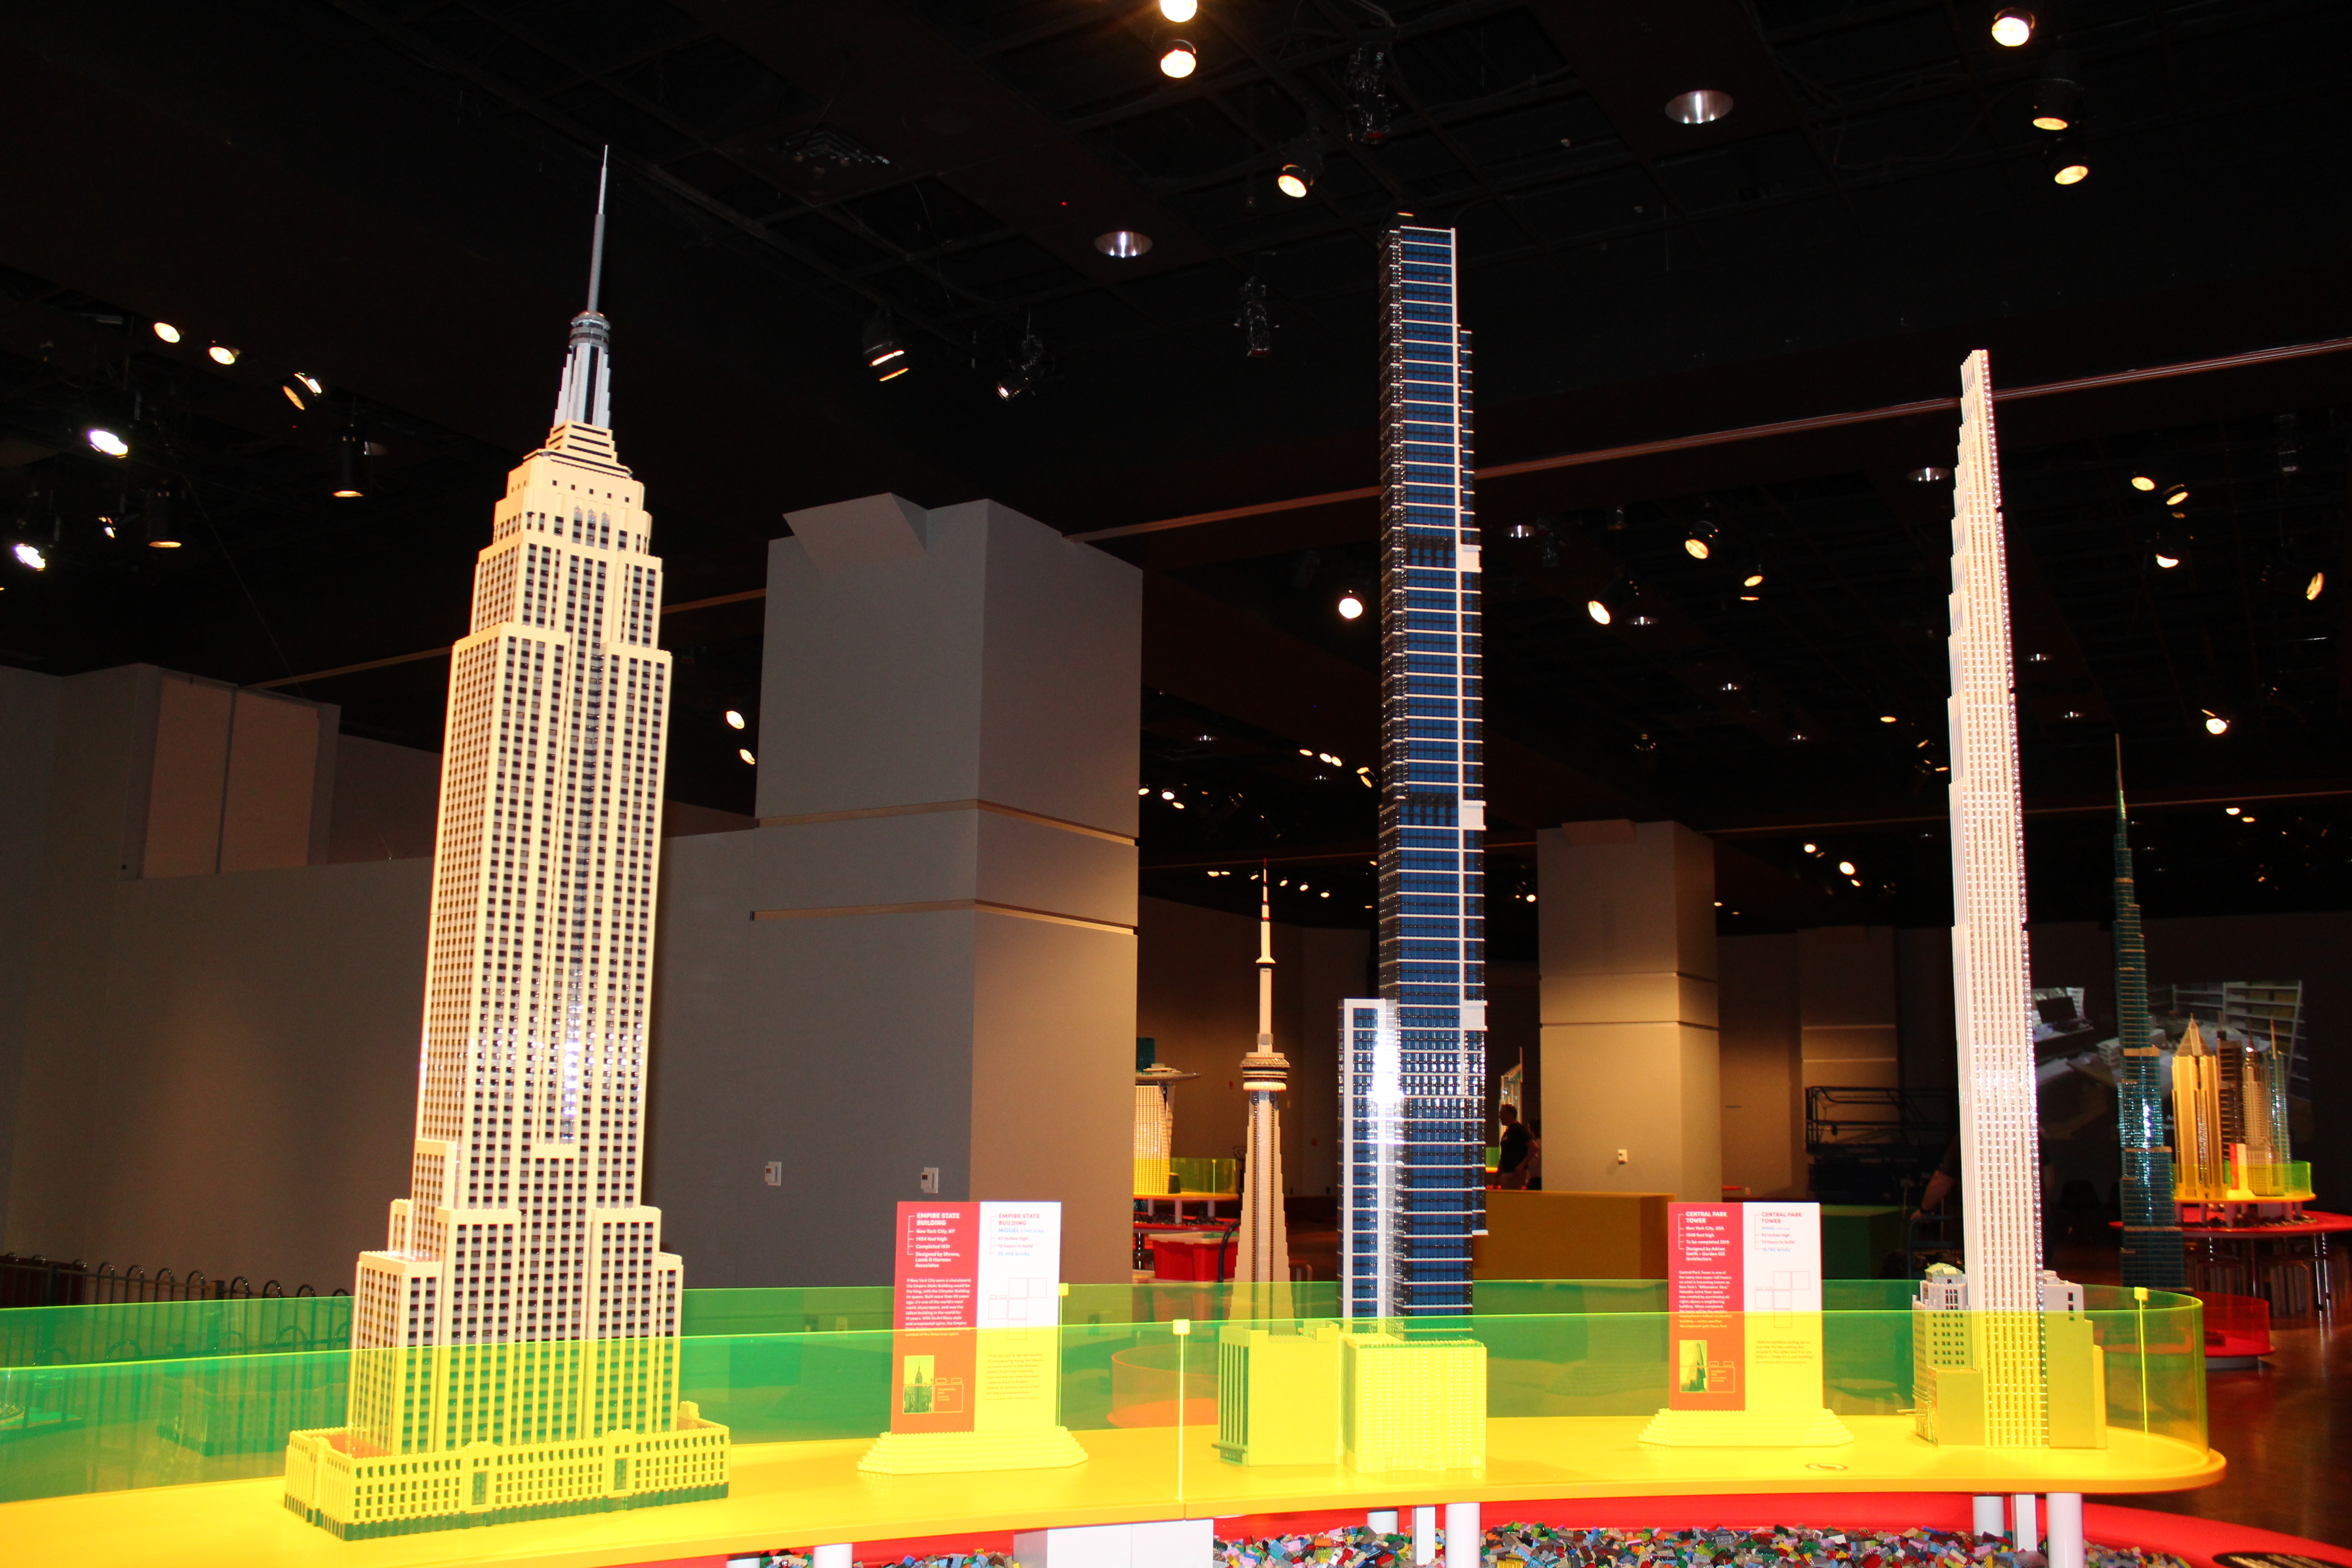 Photo shows lego replicas of the Empire State Building and the Eureka Tower